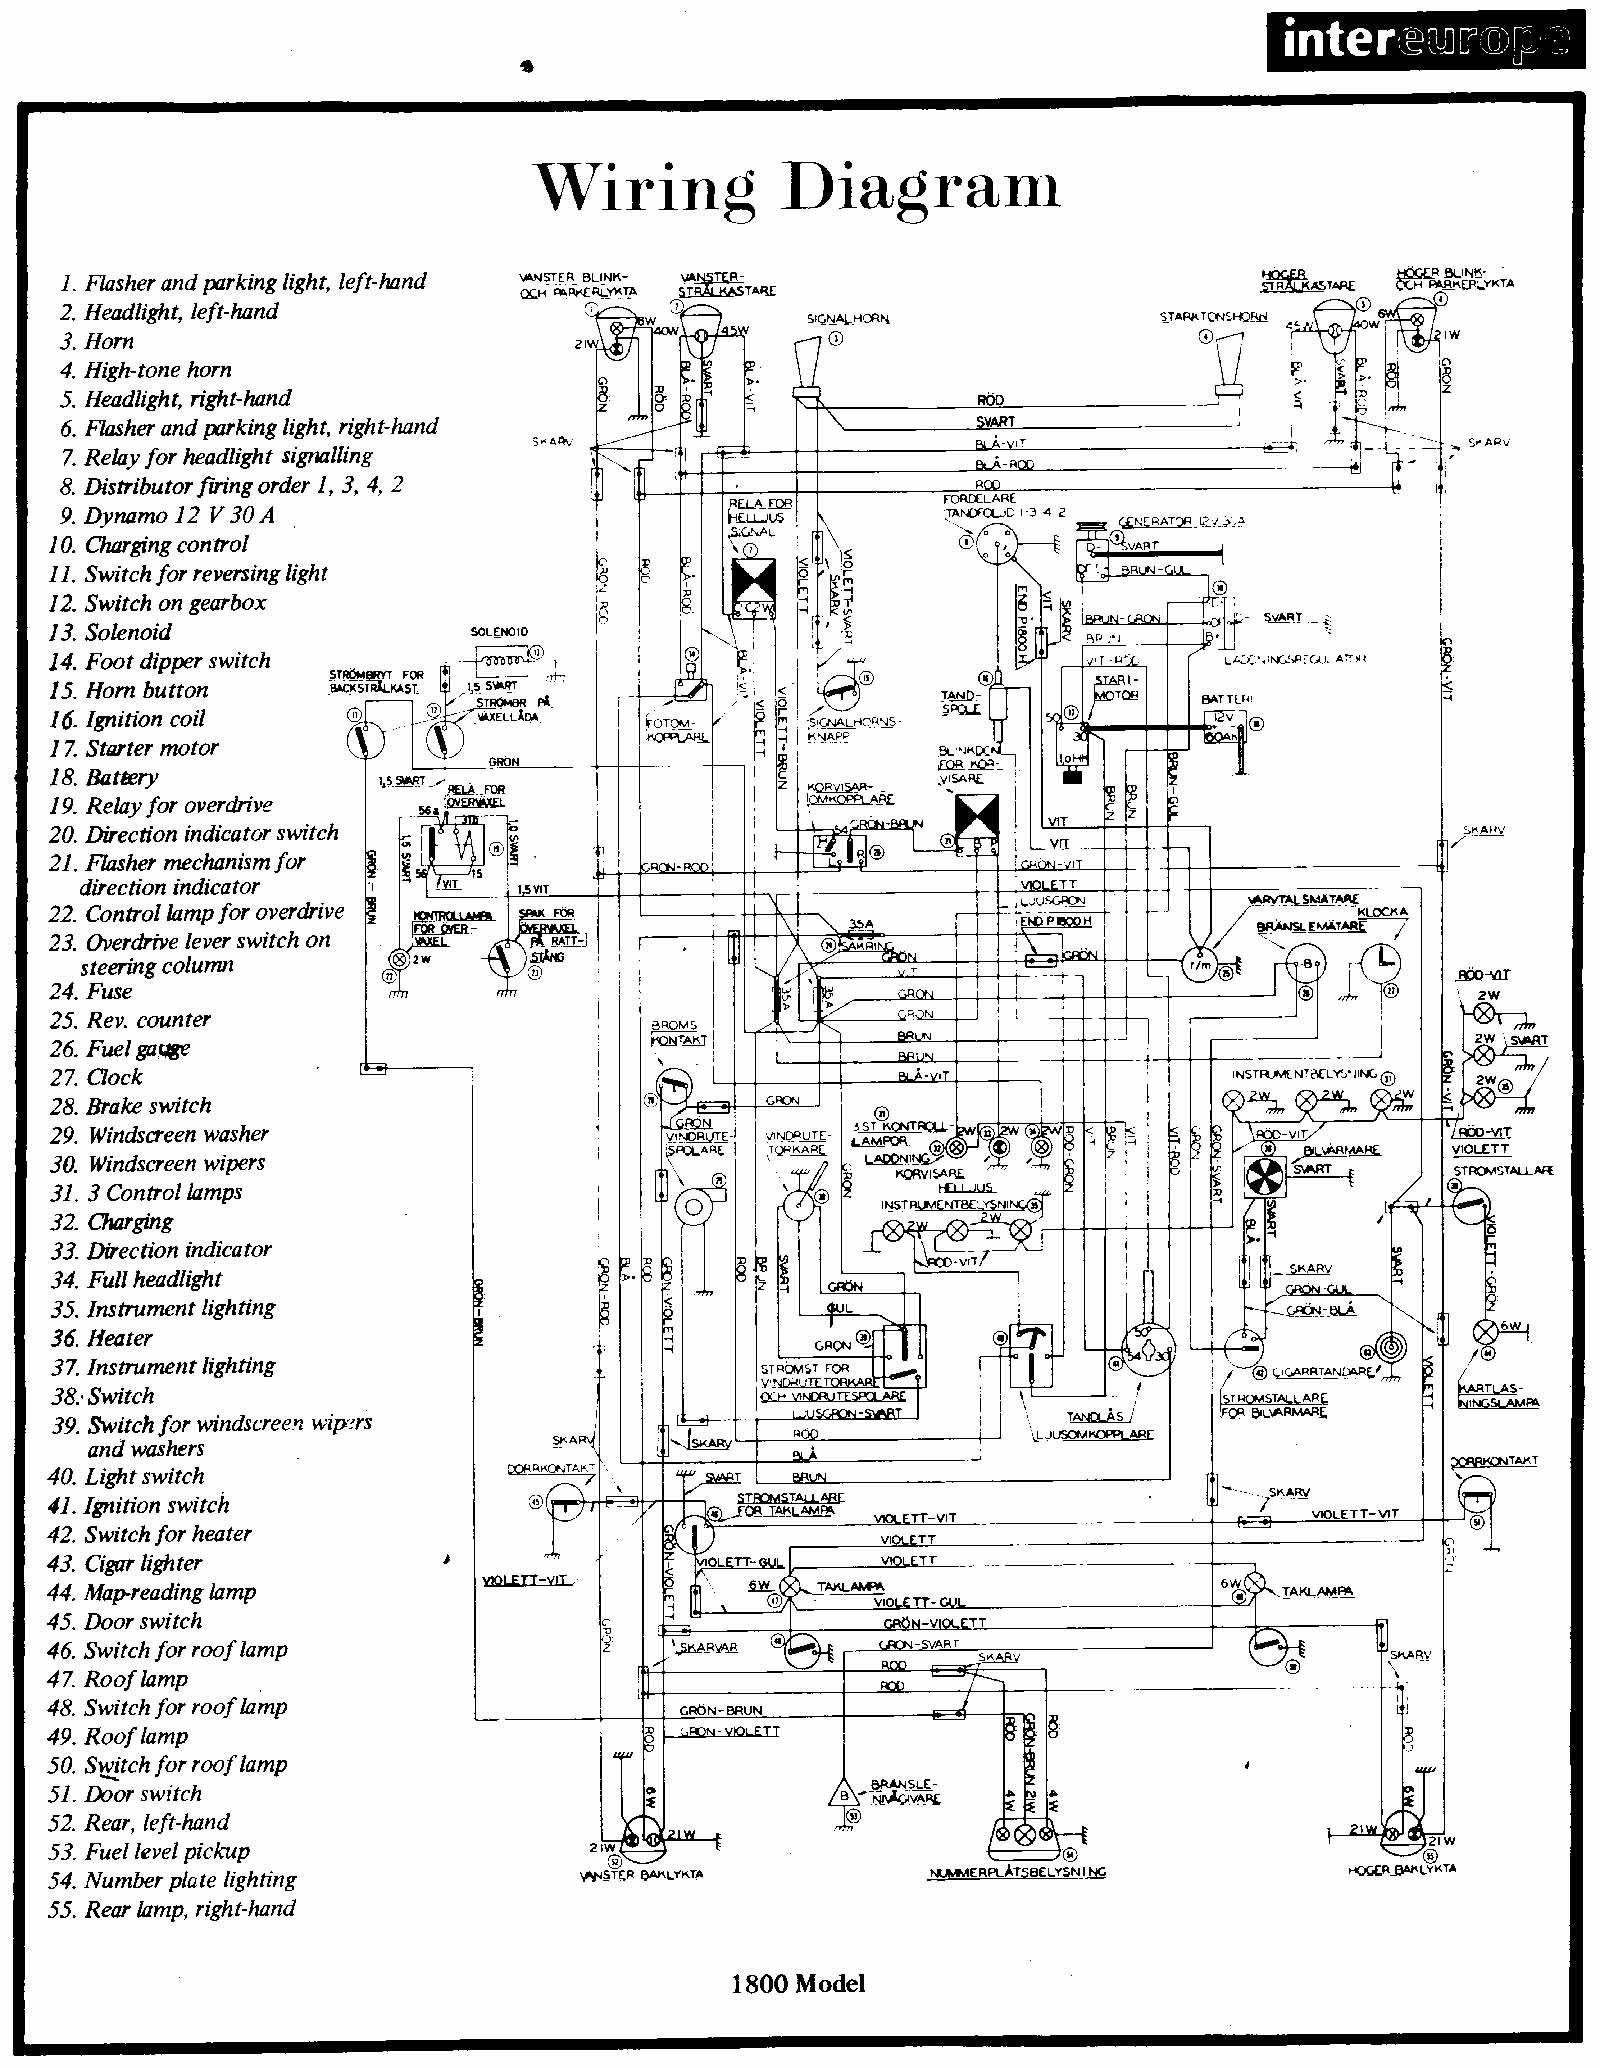 2002 ford Expedition Engine Diagram 2002 ford Thunderbird Fuse Box Diagram Lzk Gallery Wire Center • Of 2002 ford Expedition Engine Diagram